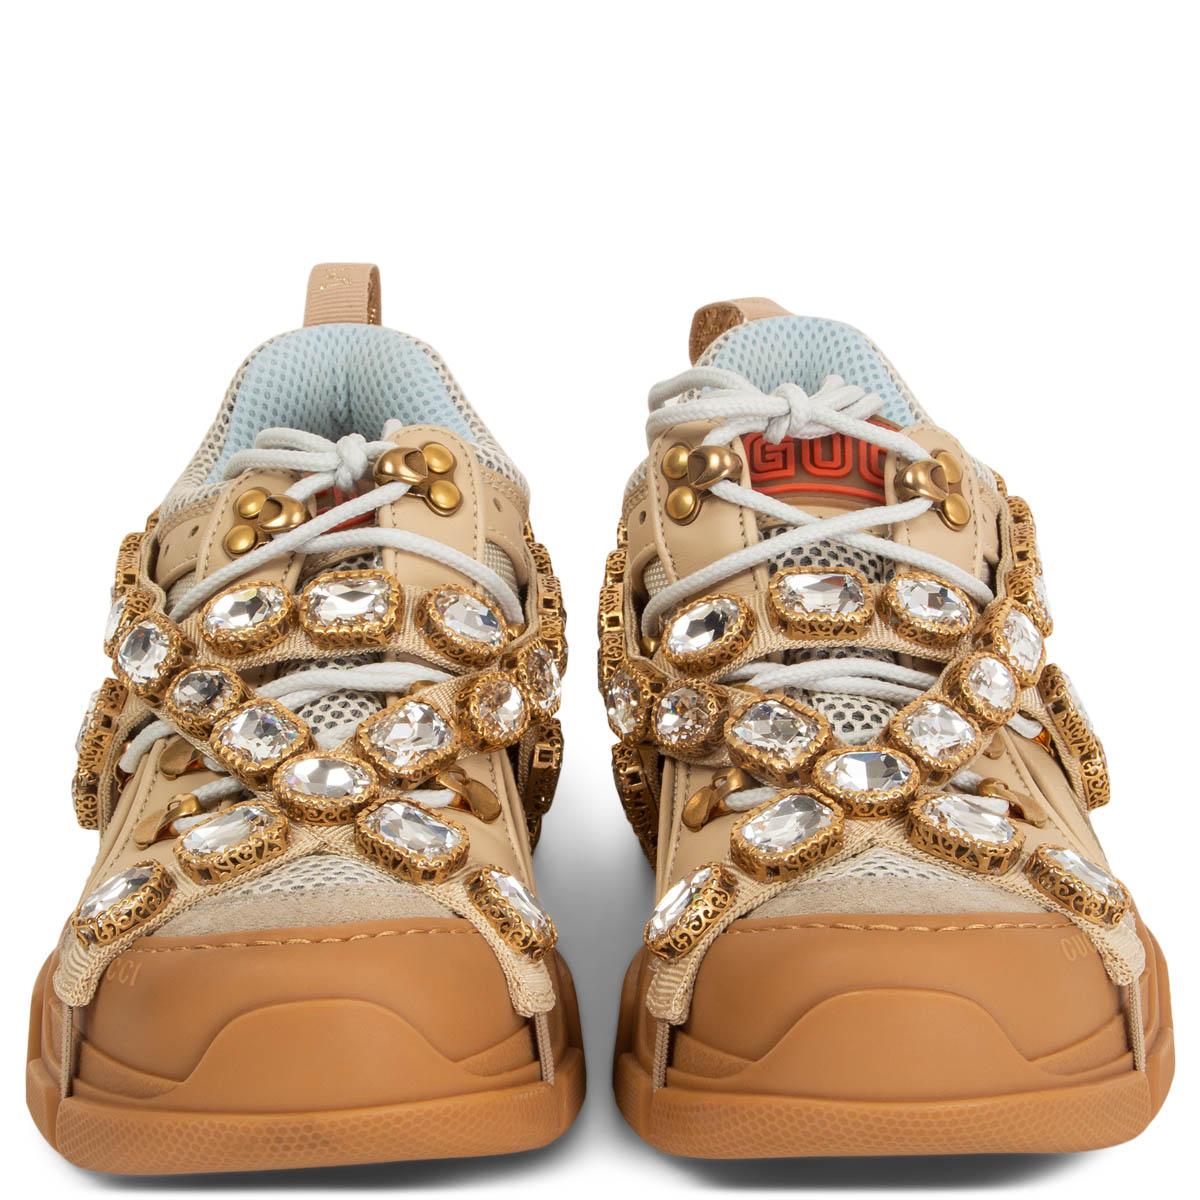 100% authentic Gucci Flashtrek sneakers in beige leather, suede and technical fabric with rubber lug sole from the fall/winter 2018 collection runway. Sparkling crystals are embroidered onto a removable elastic strap, wrapping around these sneakers.